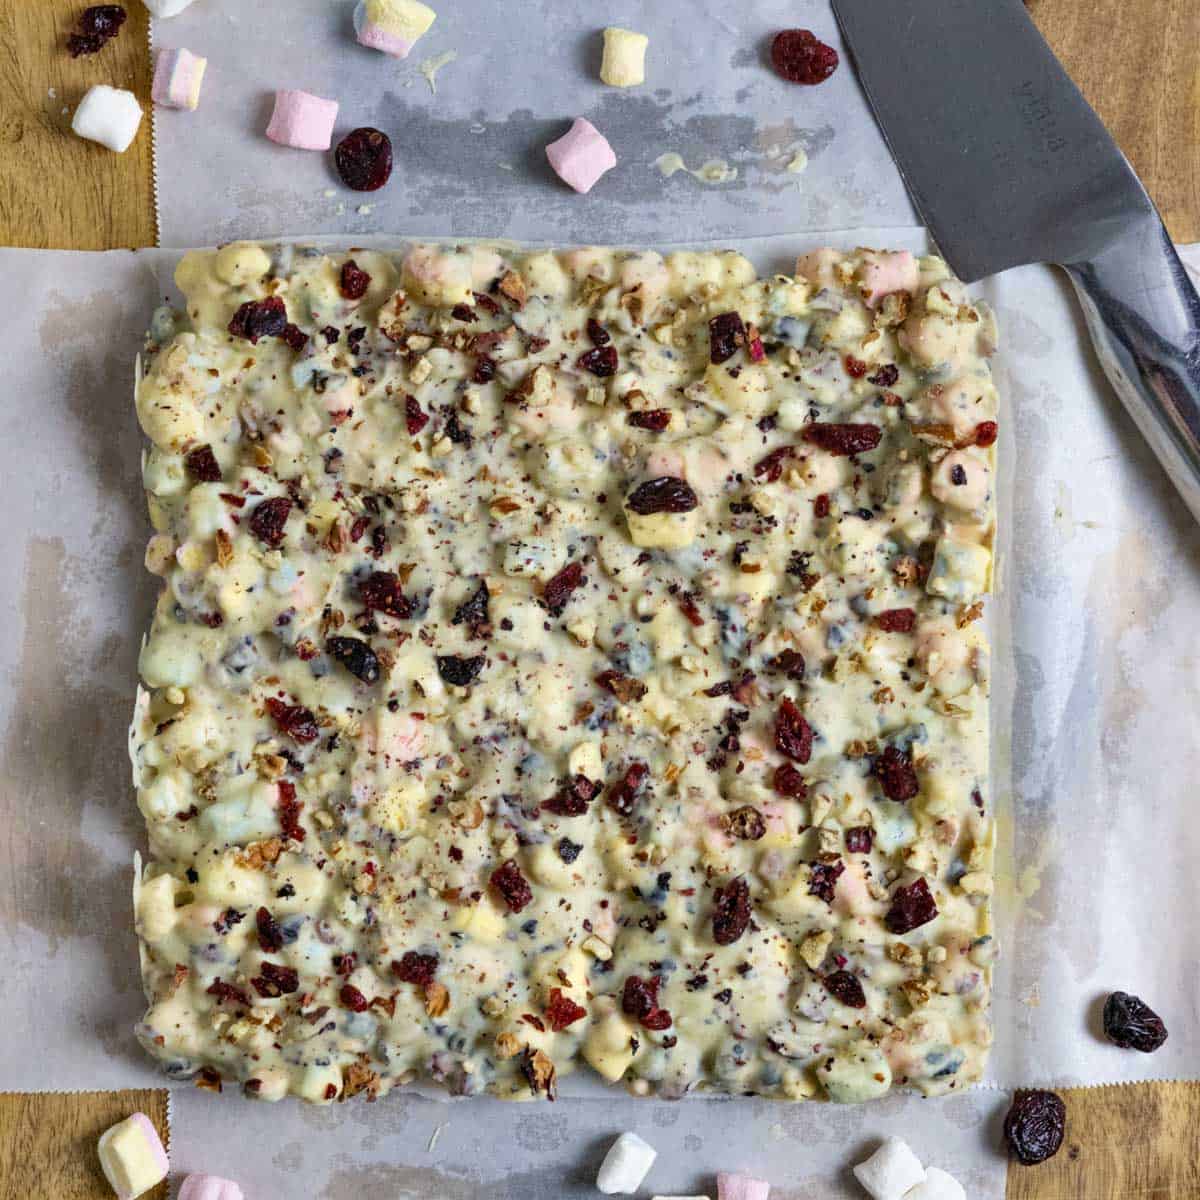 Entire block of rocky road on parchment on a board ready to slice.